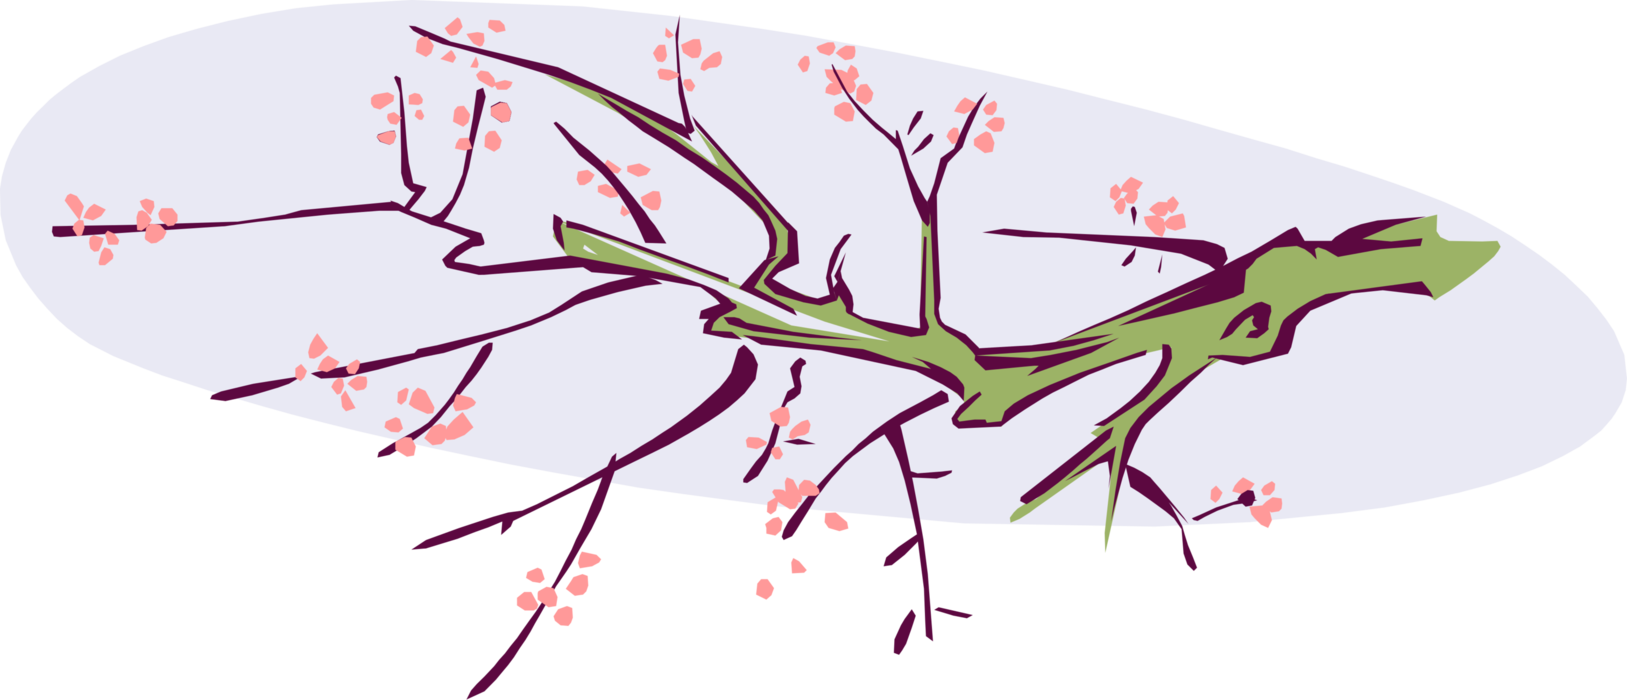 Vector Illustration of Deciduous Tree Branch with Flower Blossoms